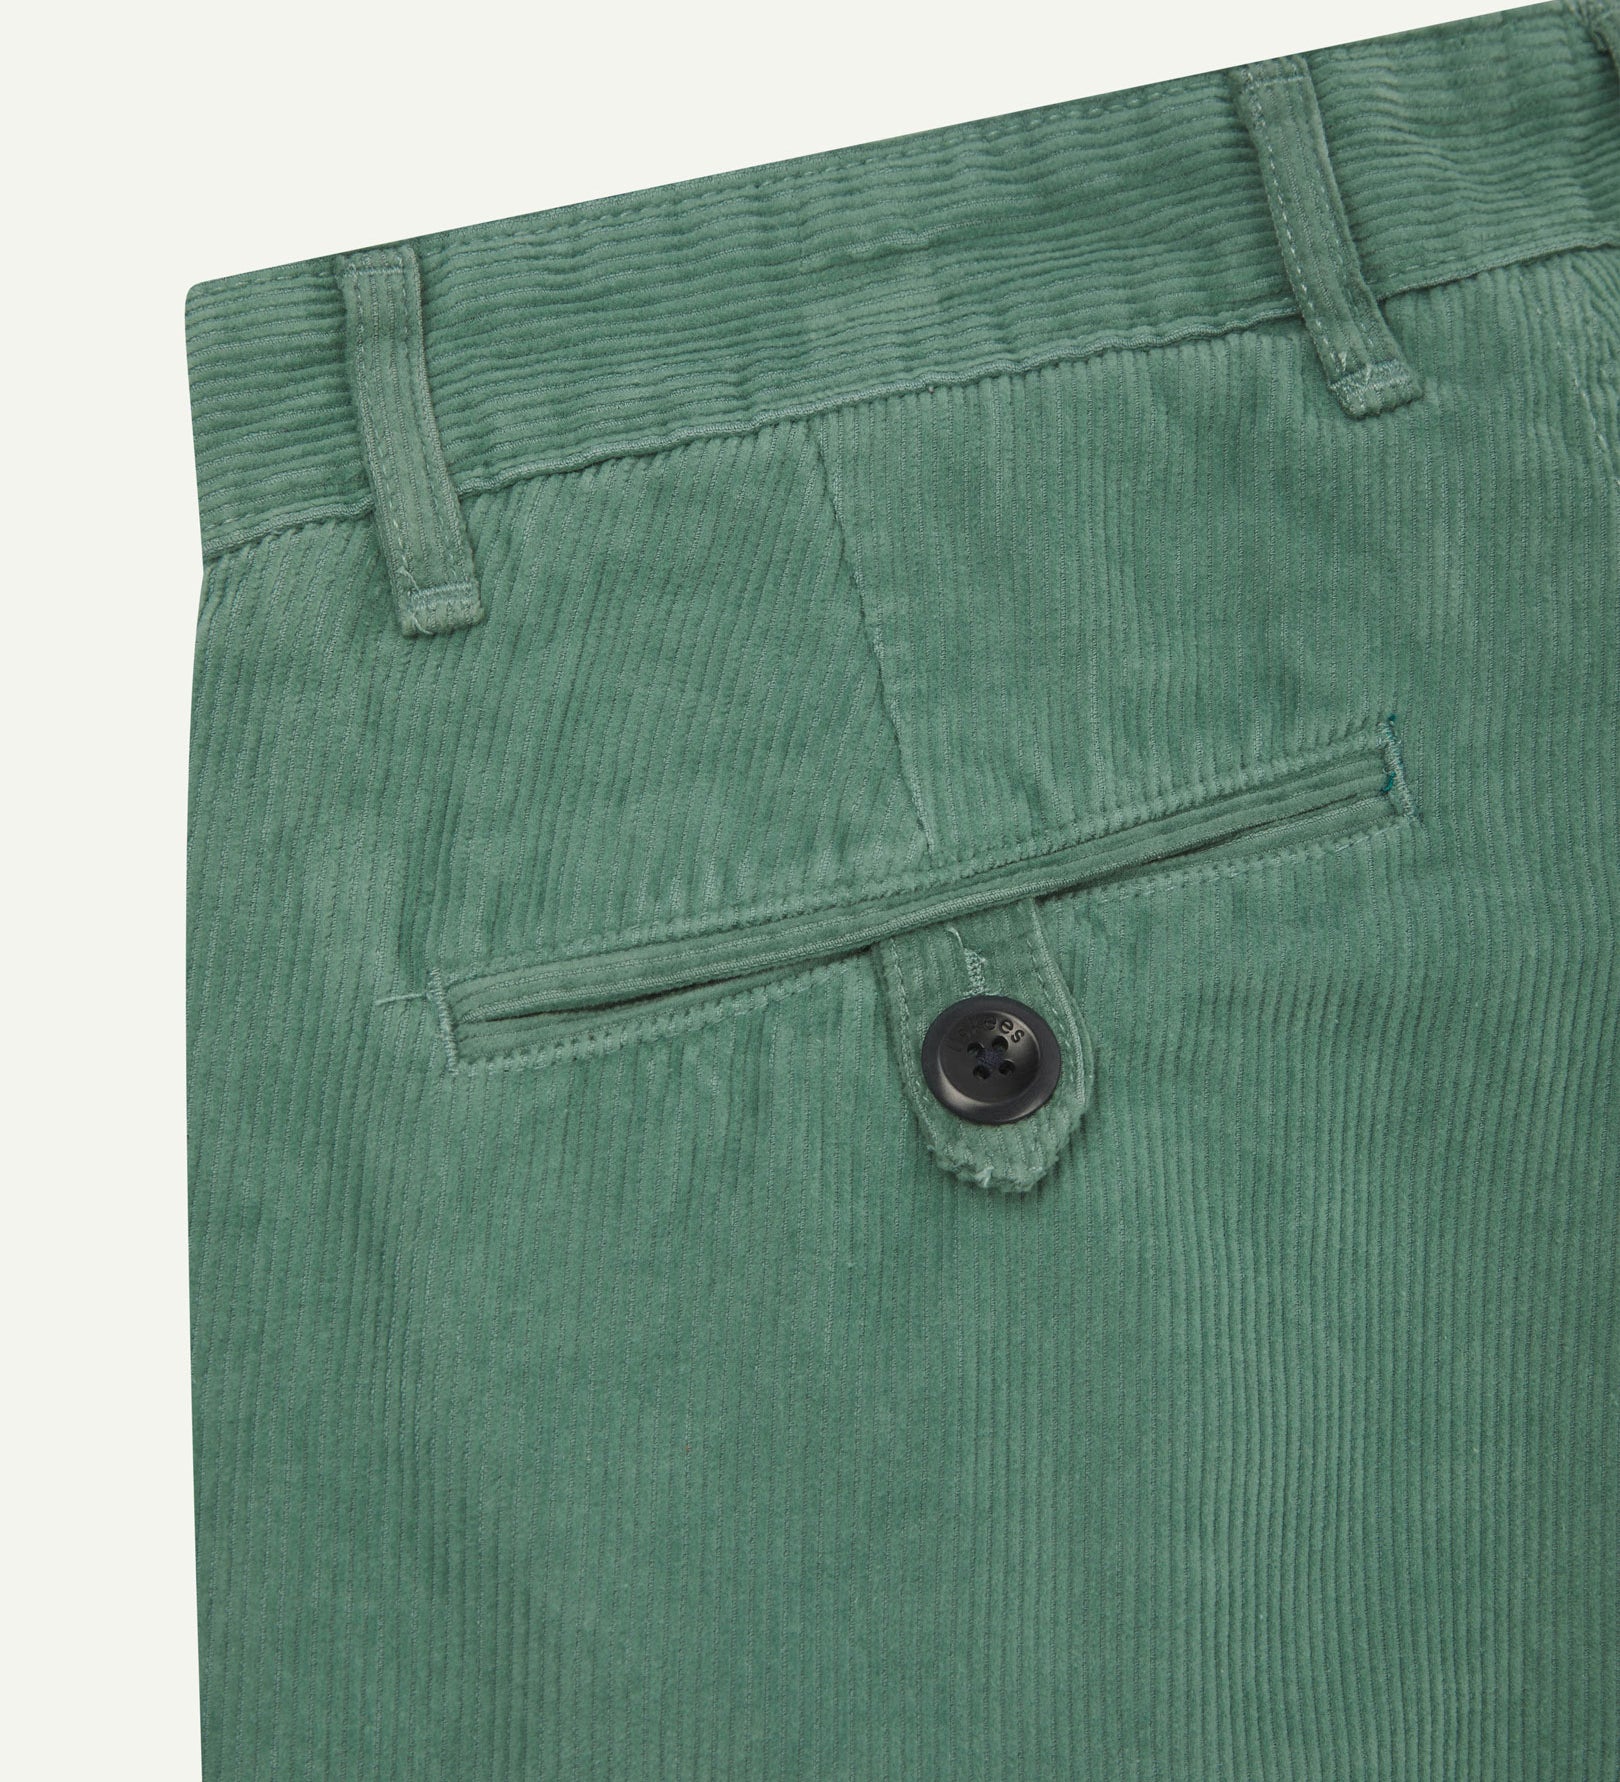 Close up back shot of Uskees 5018 cord boat pants in eucalyptus with focus on neat back pocket secured with Corozo button and belt loops.